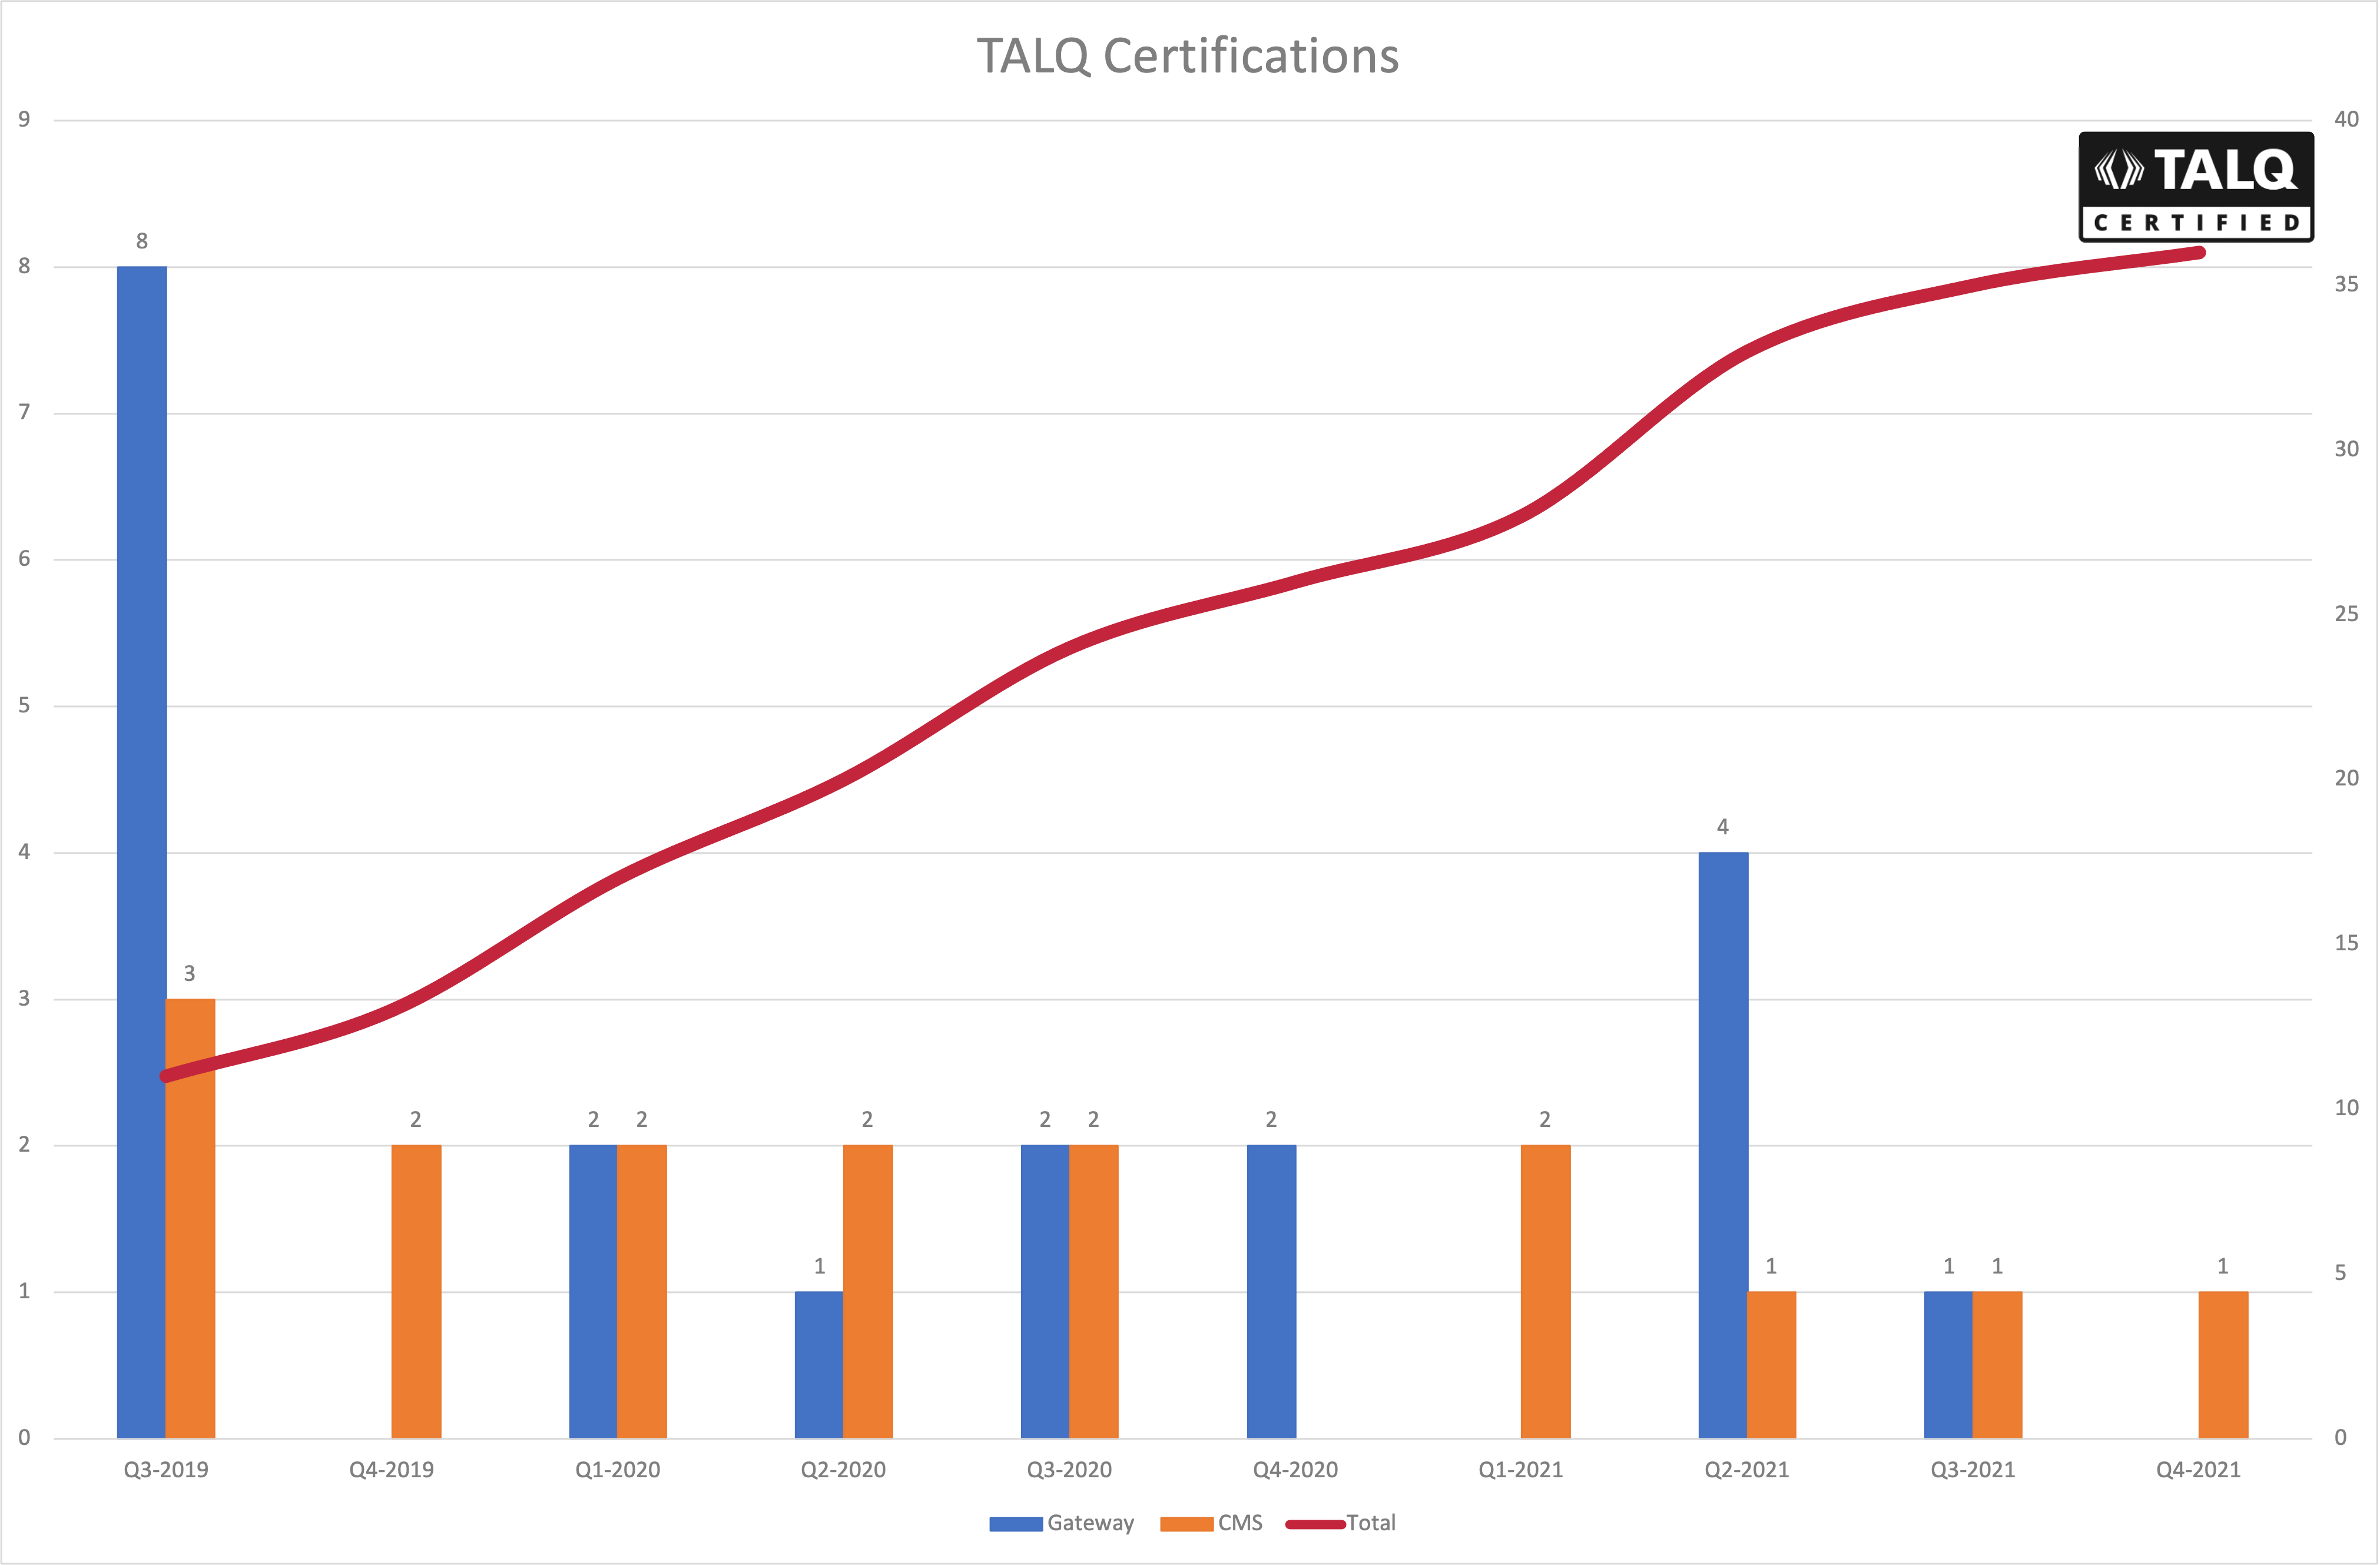 Number of TALQ certifications